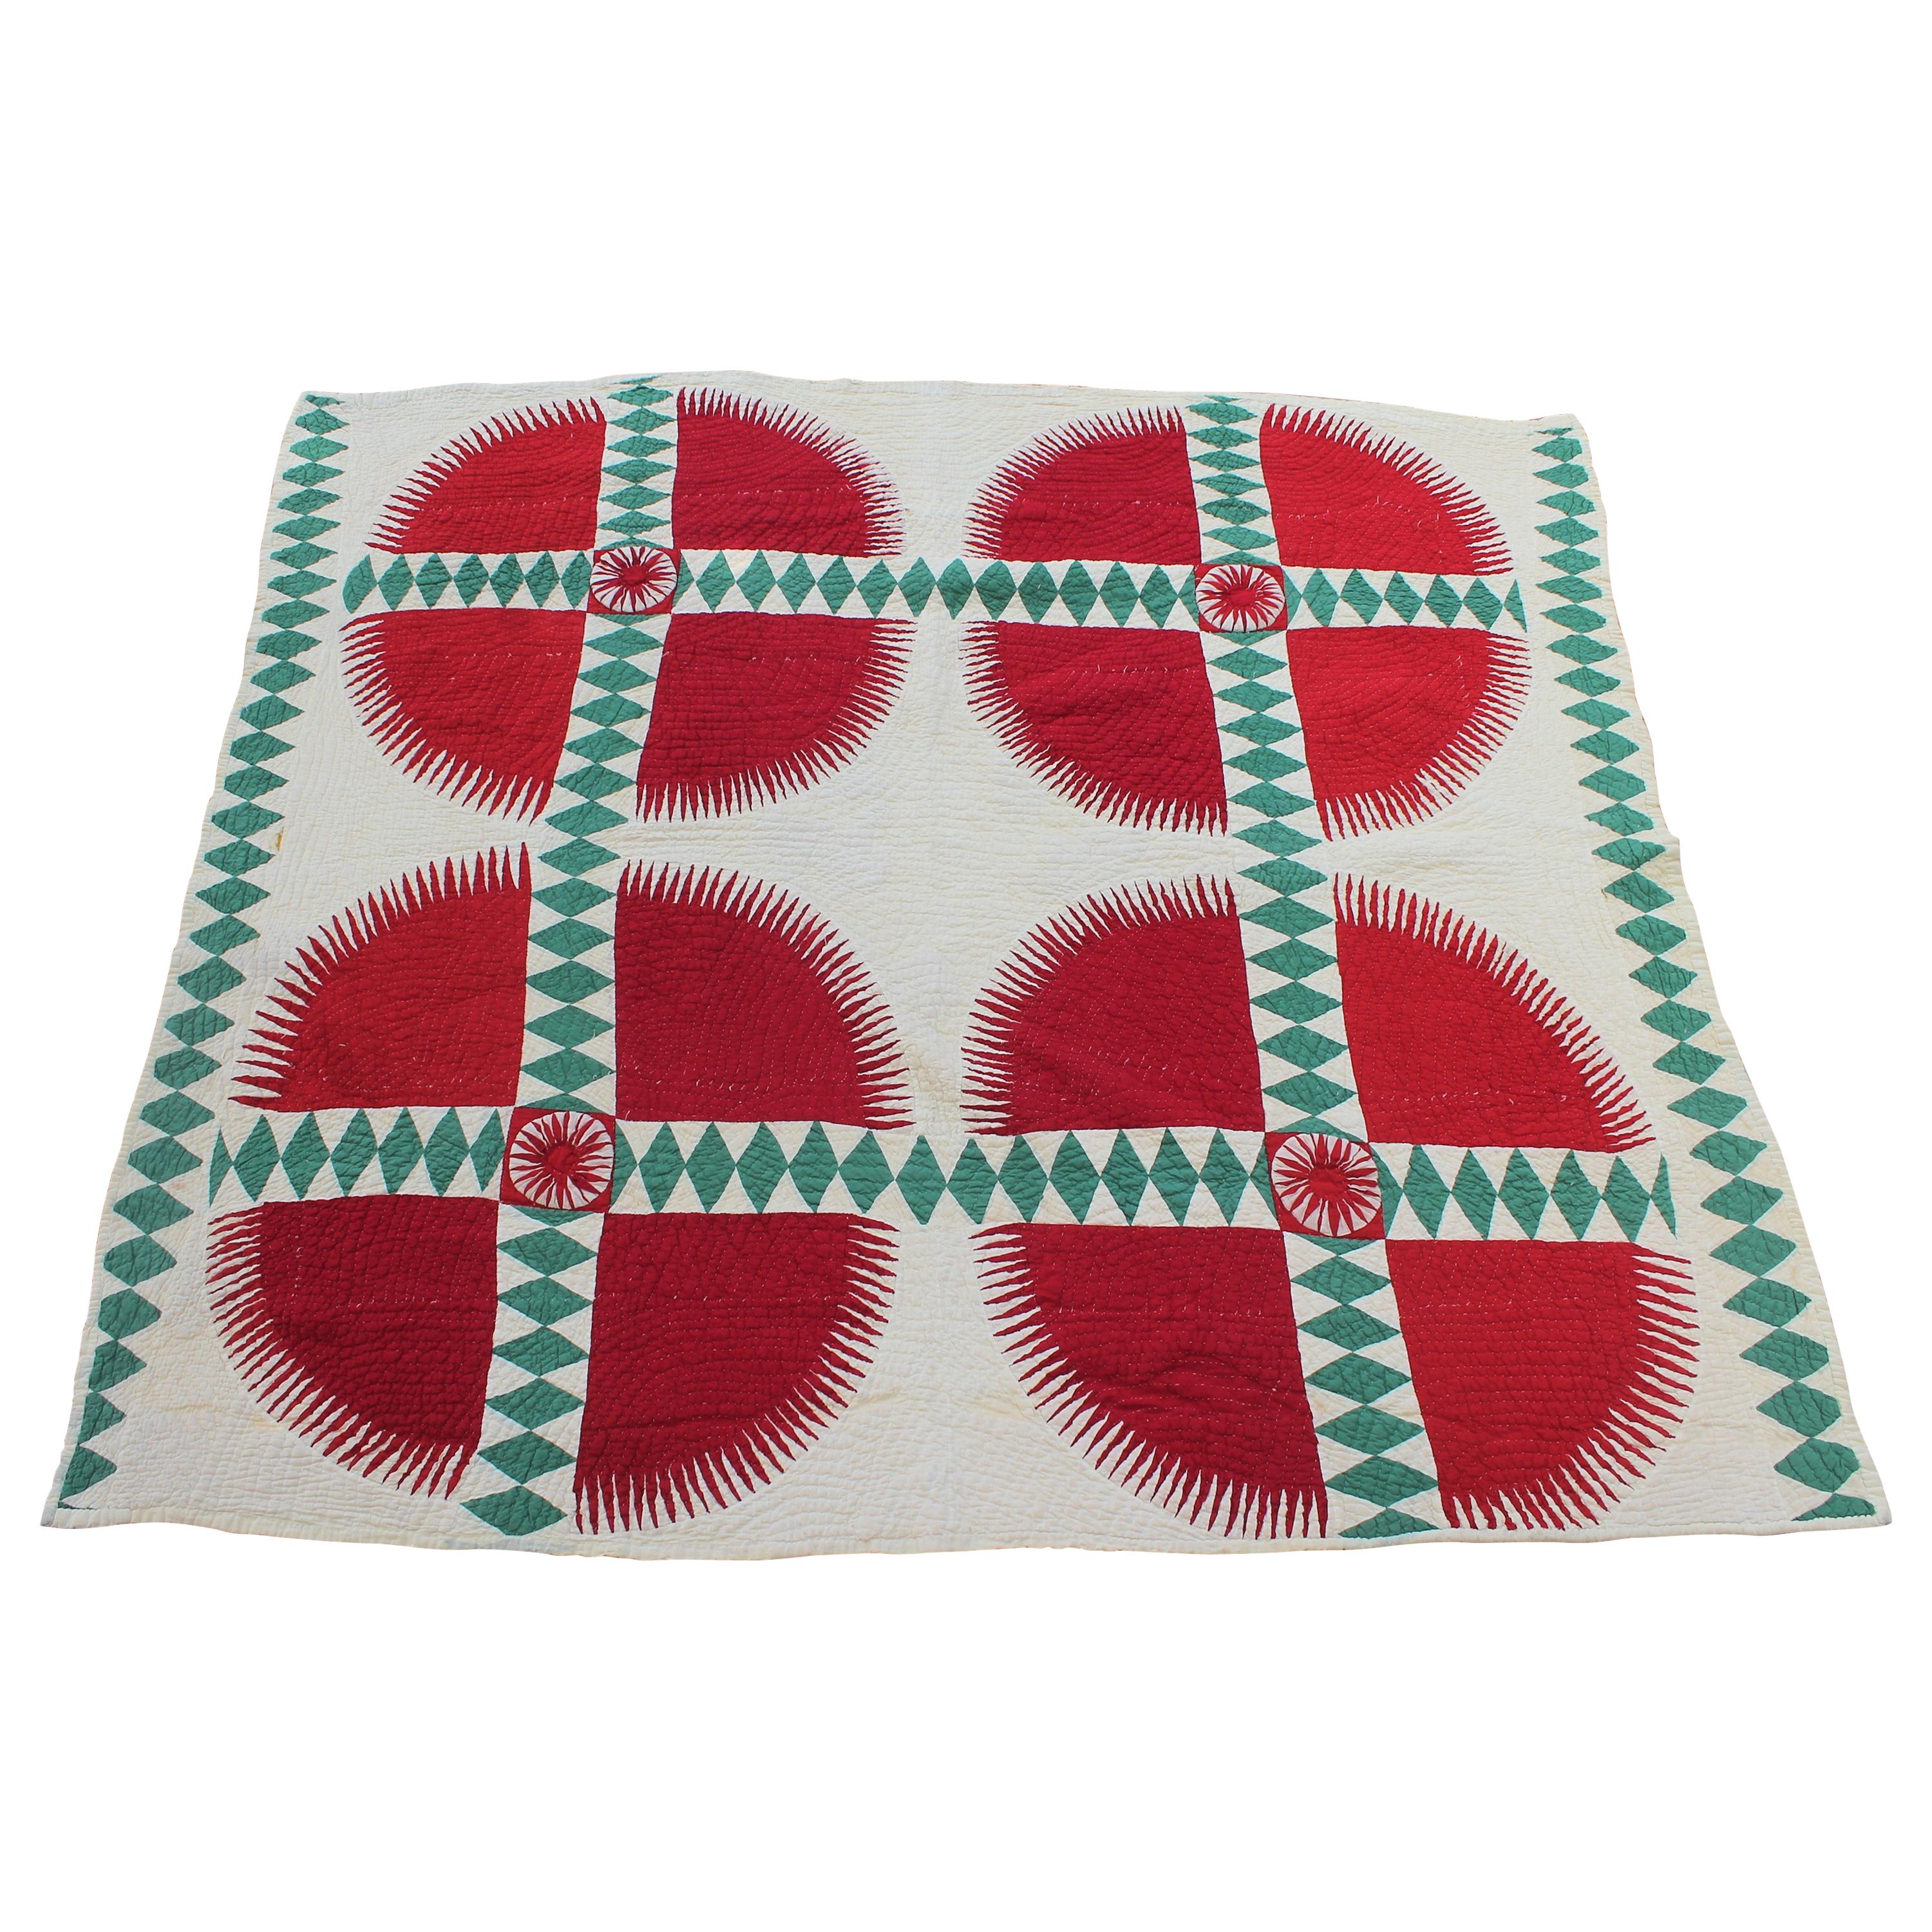 Antique Quilt Red and Green New York Beauty